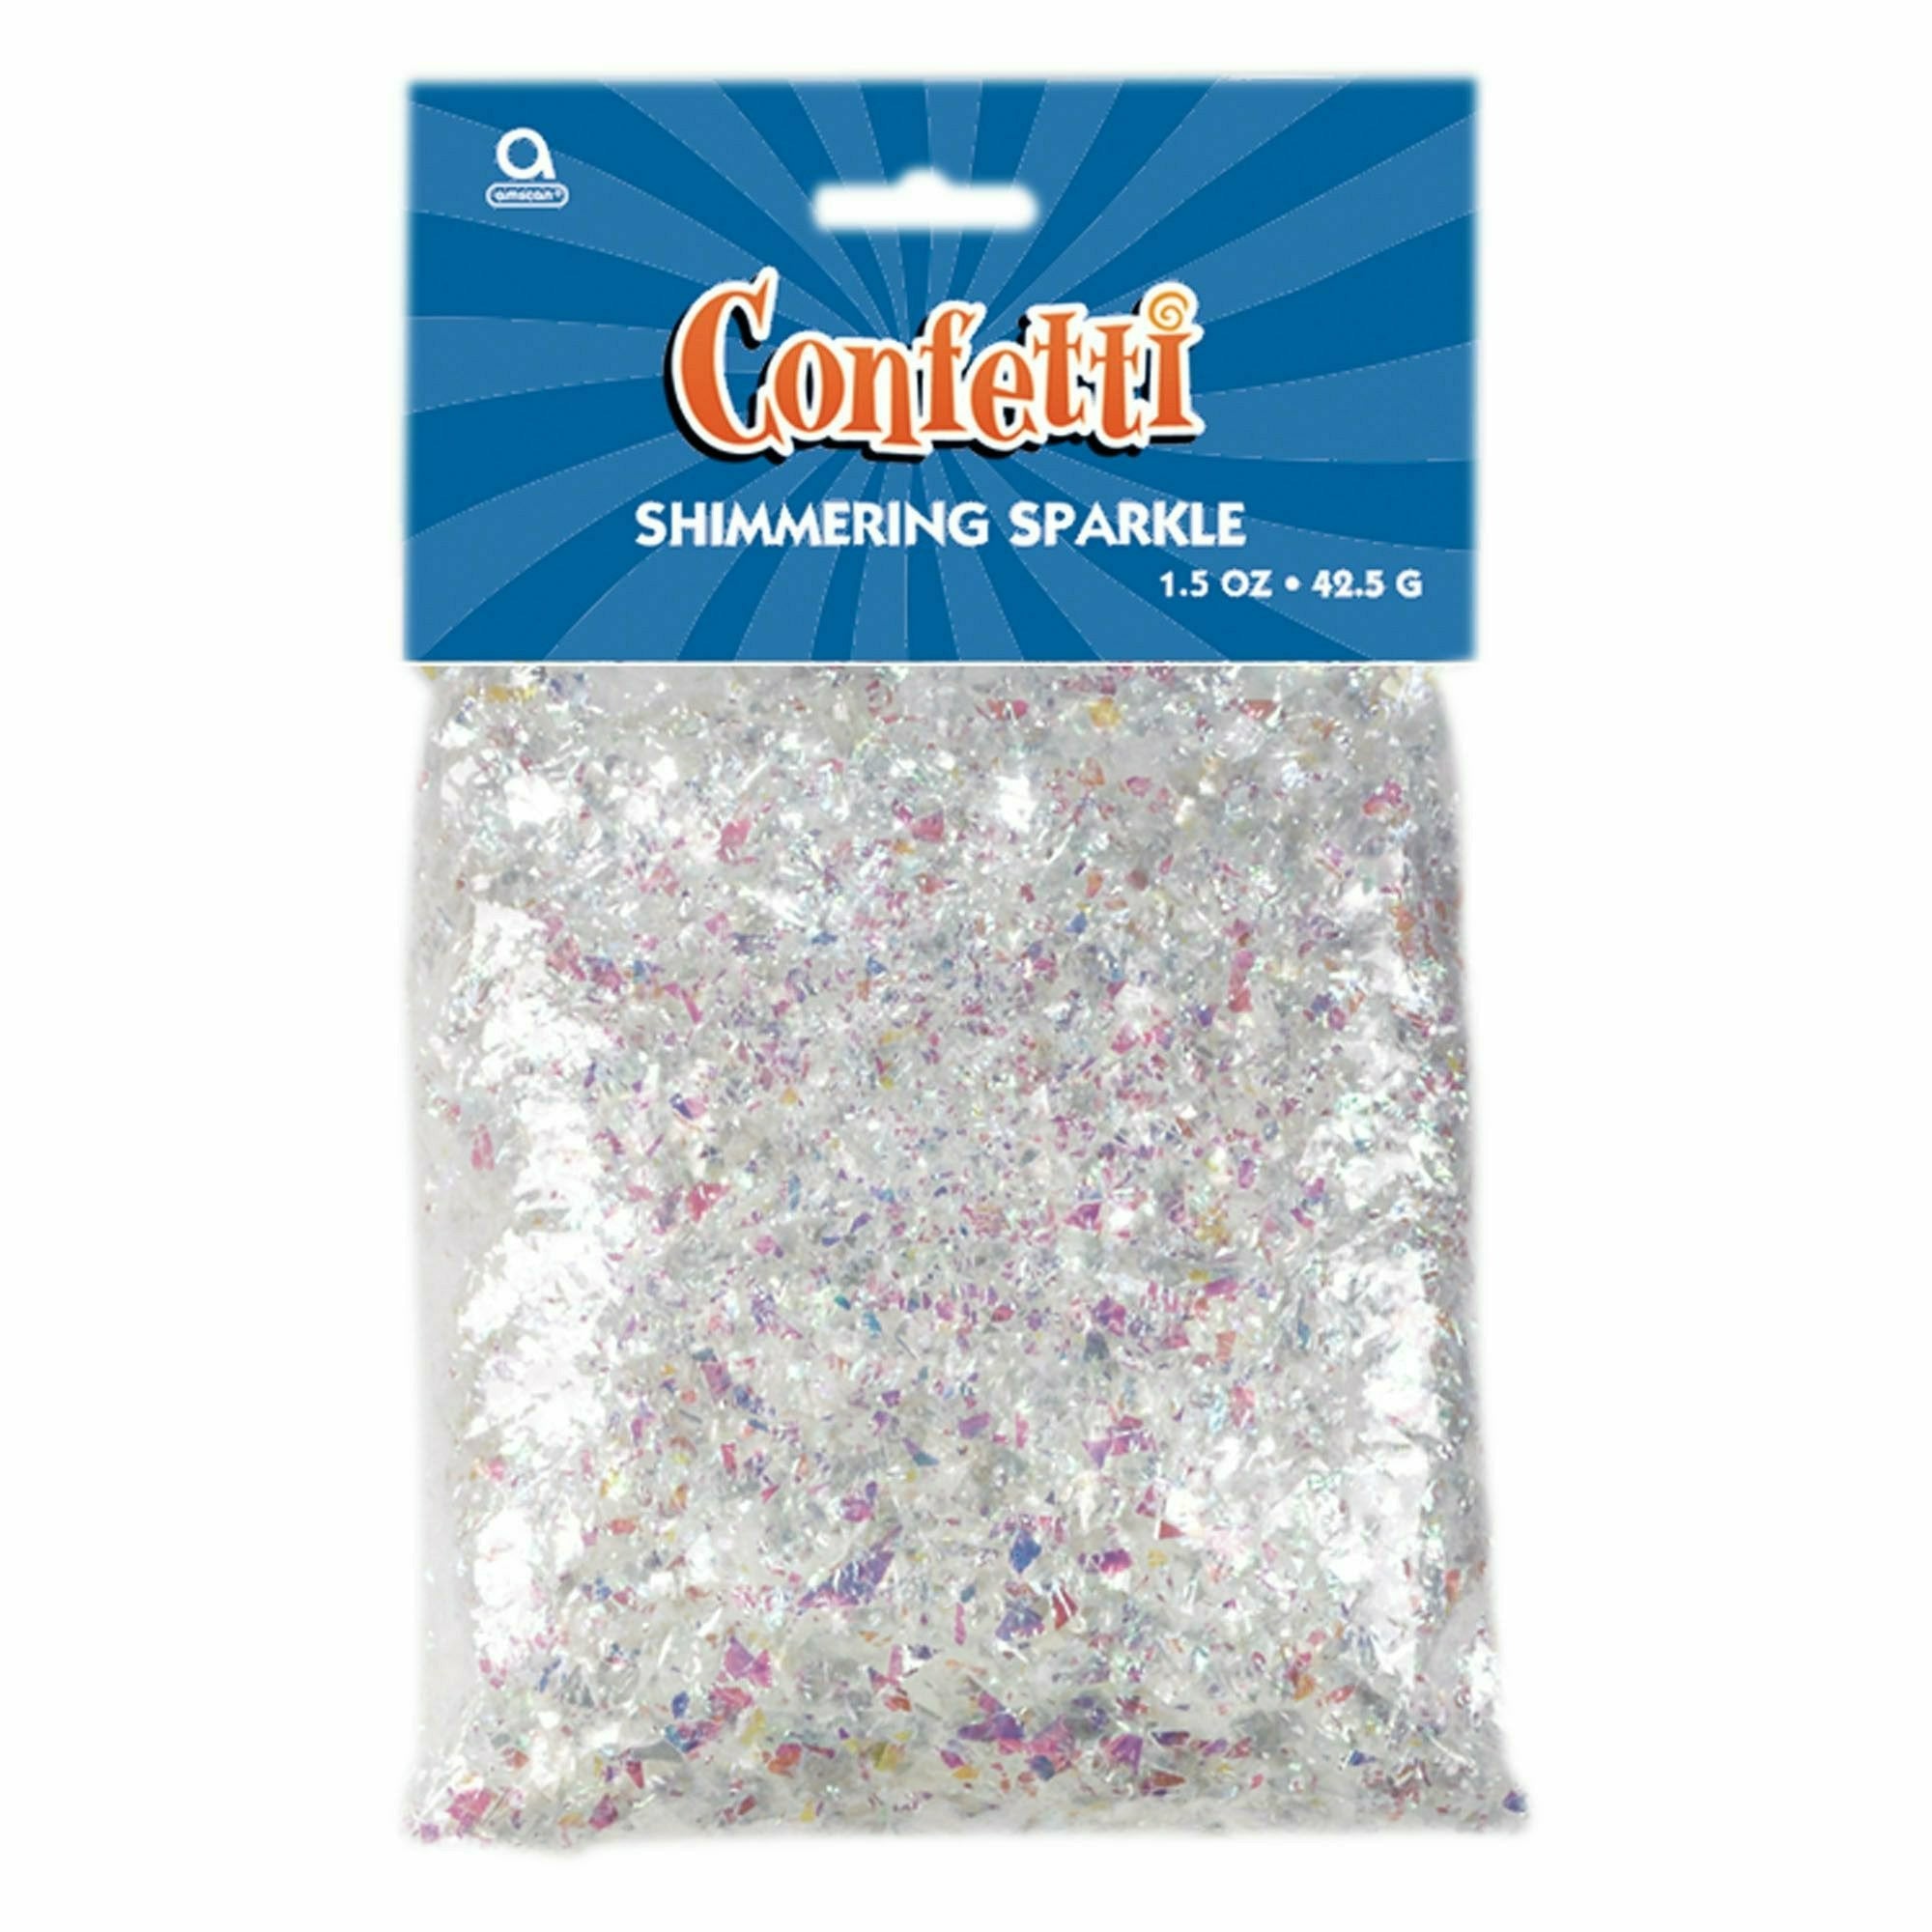 Amscan DECORATIONS Iridescent Shimmering Sparkle Confetti